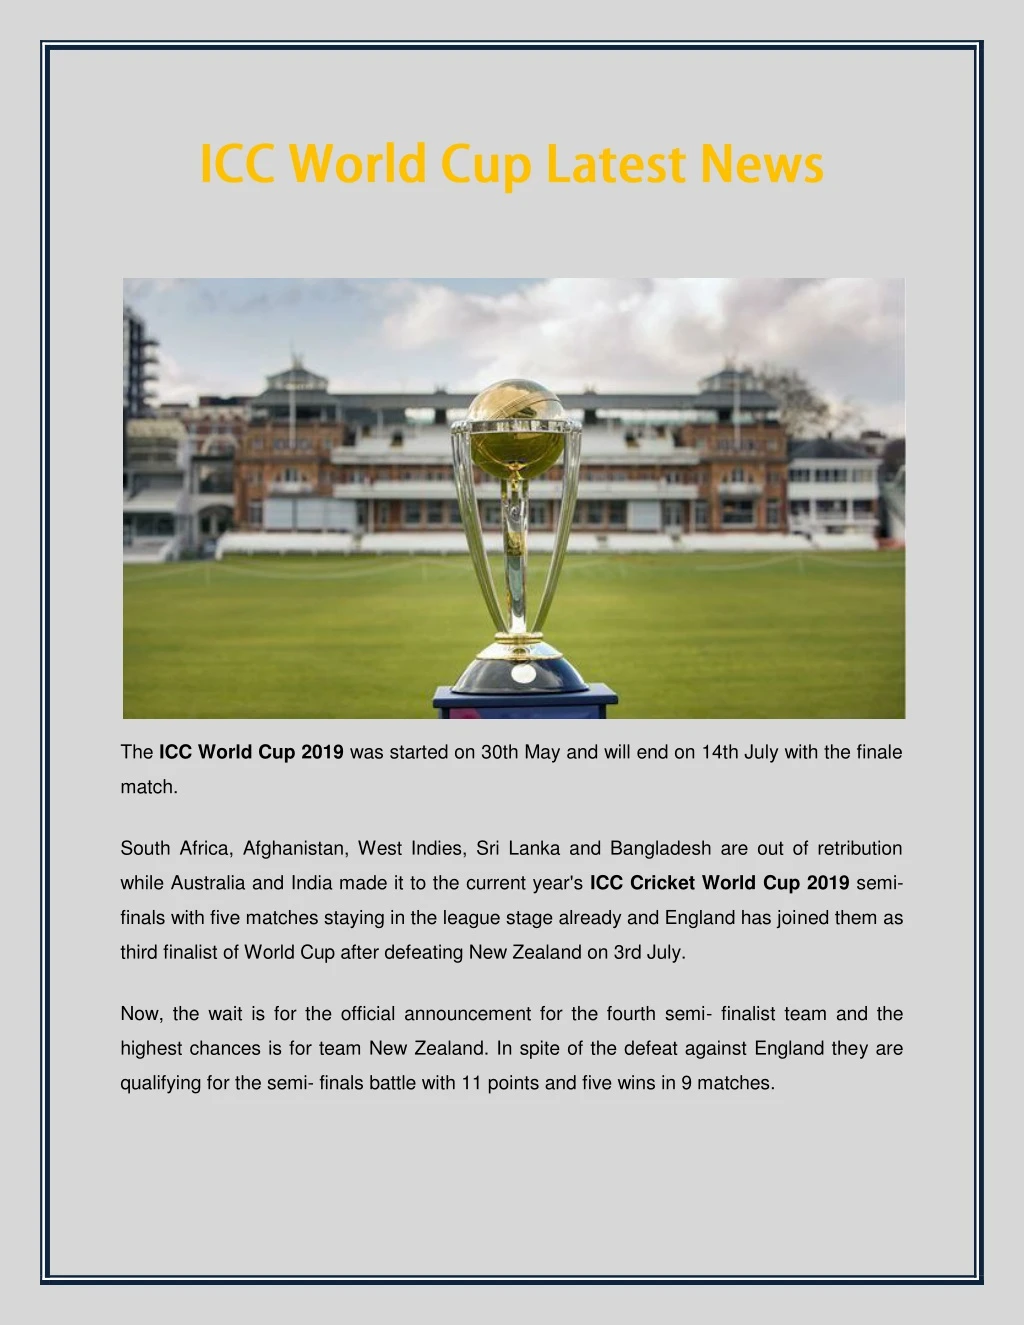 the icc world cup 2019 was started on 30th